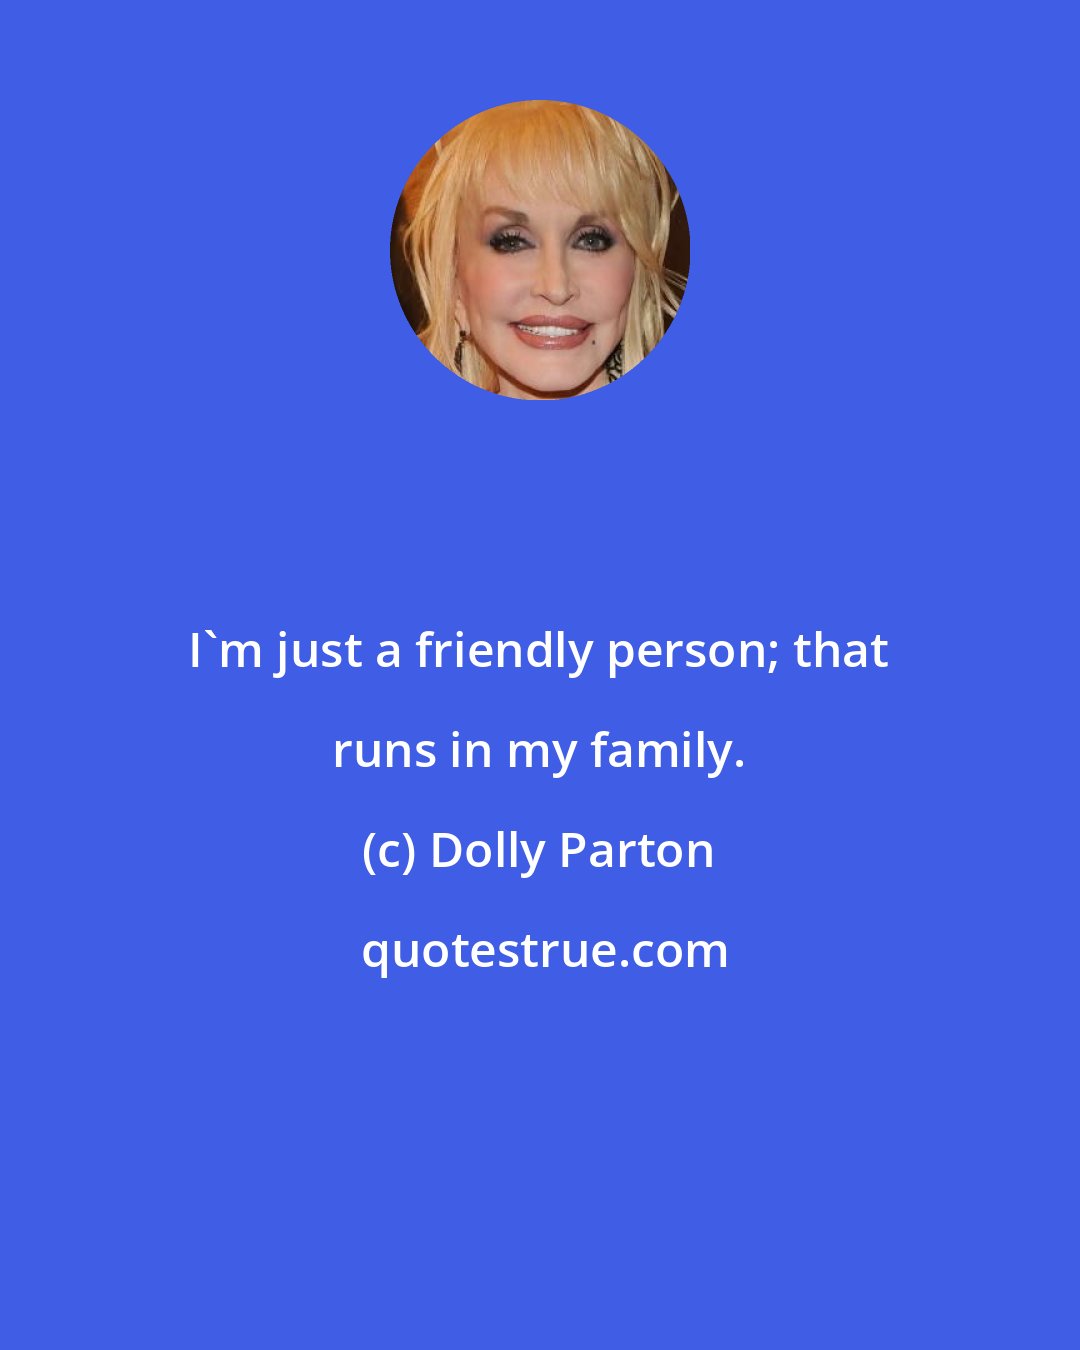 Dolly Parton: I'm just a friendly person; that runs in my family.